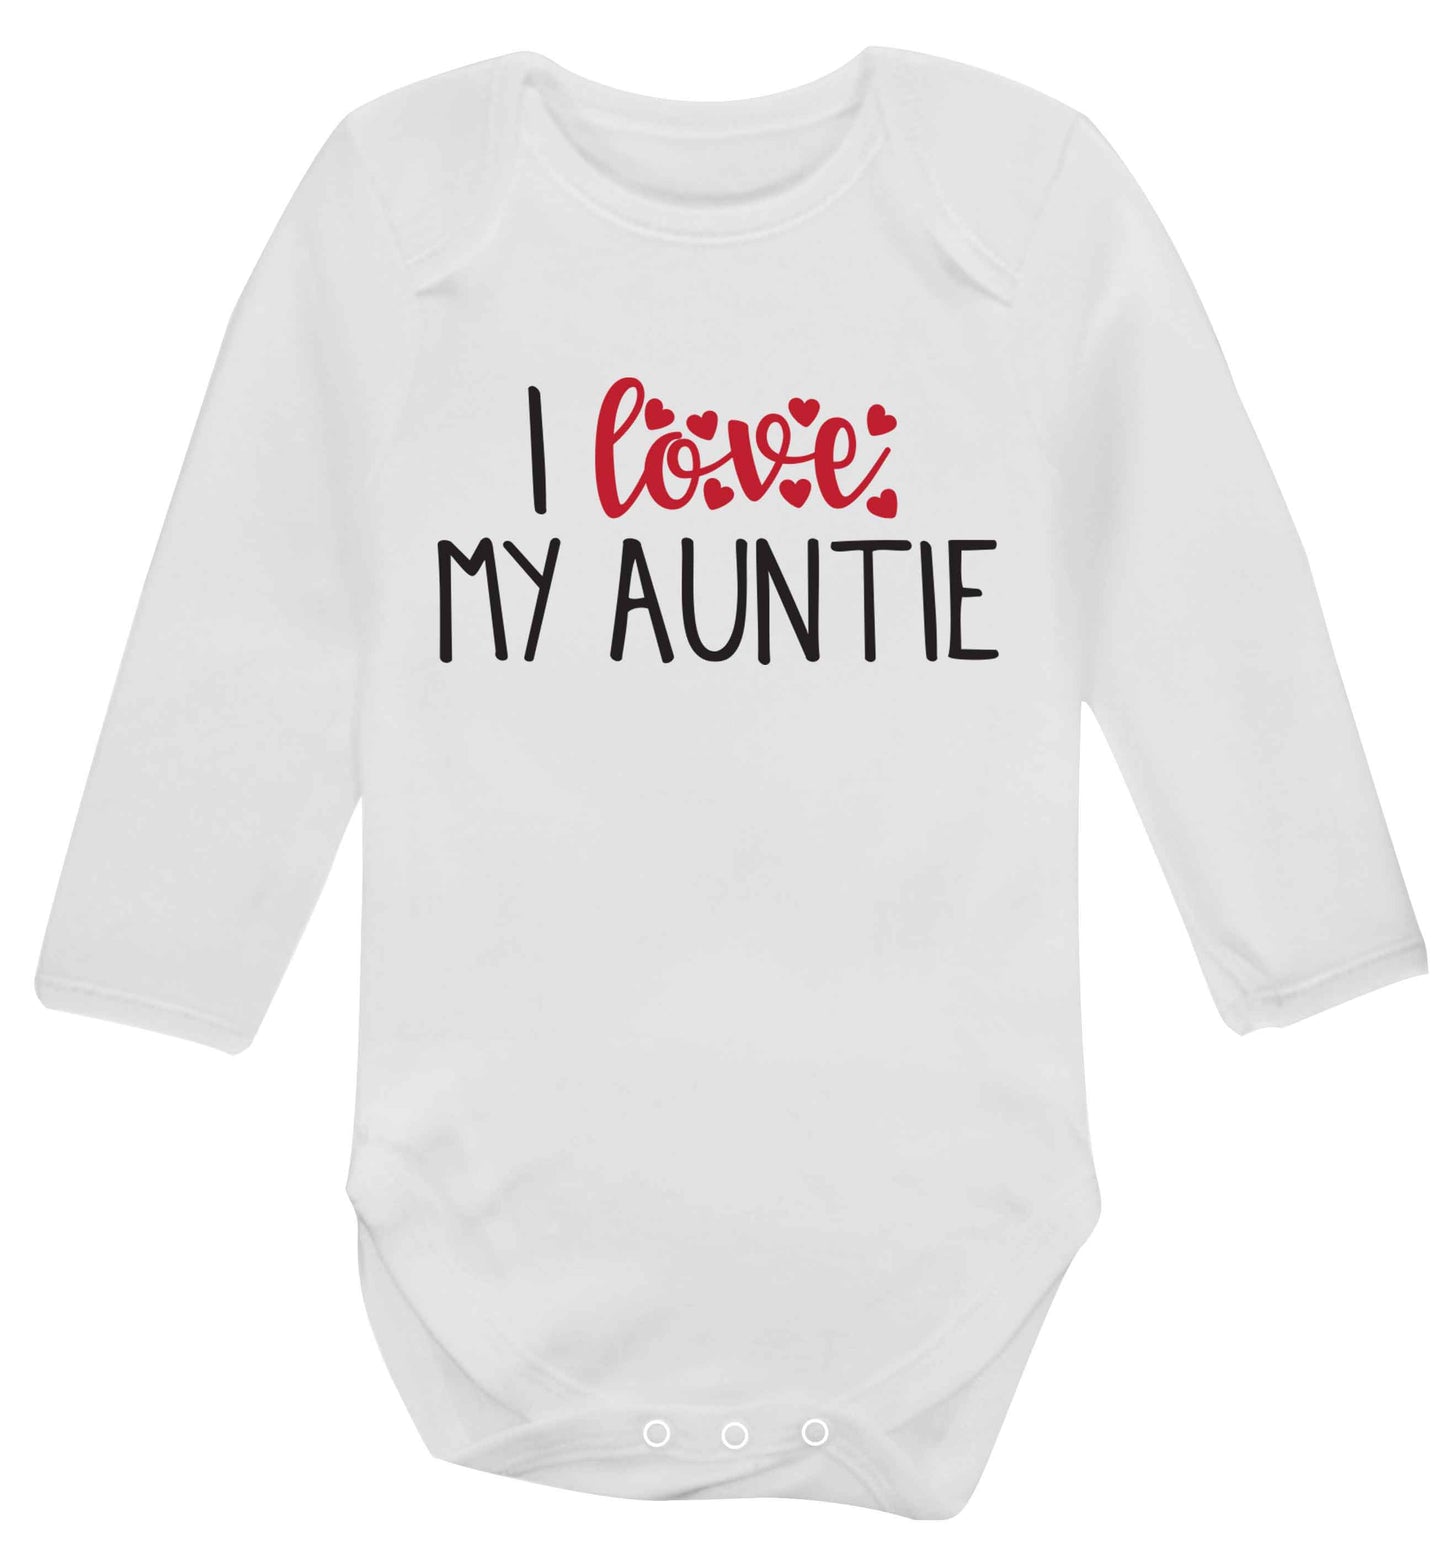 I love my auntie Baby Vest long sleeved white 6-12 months